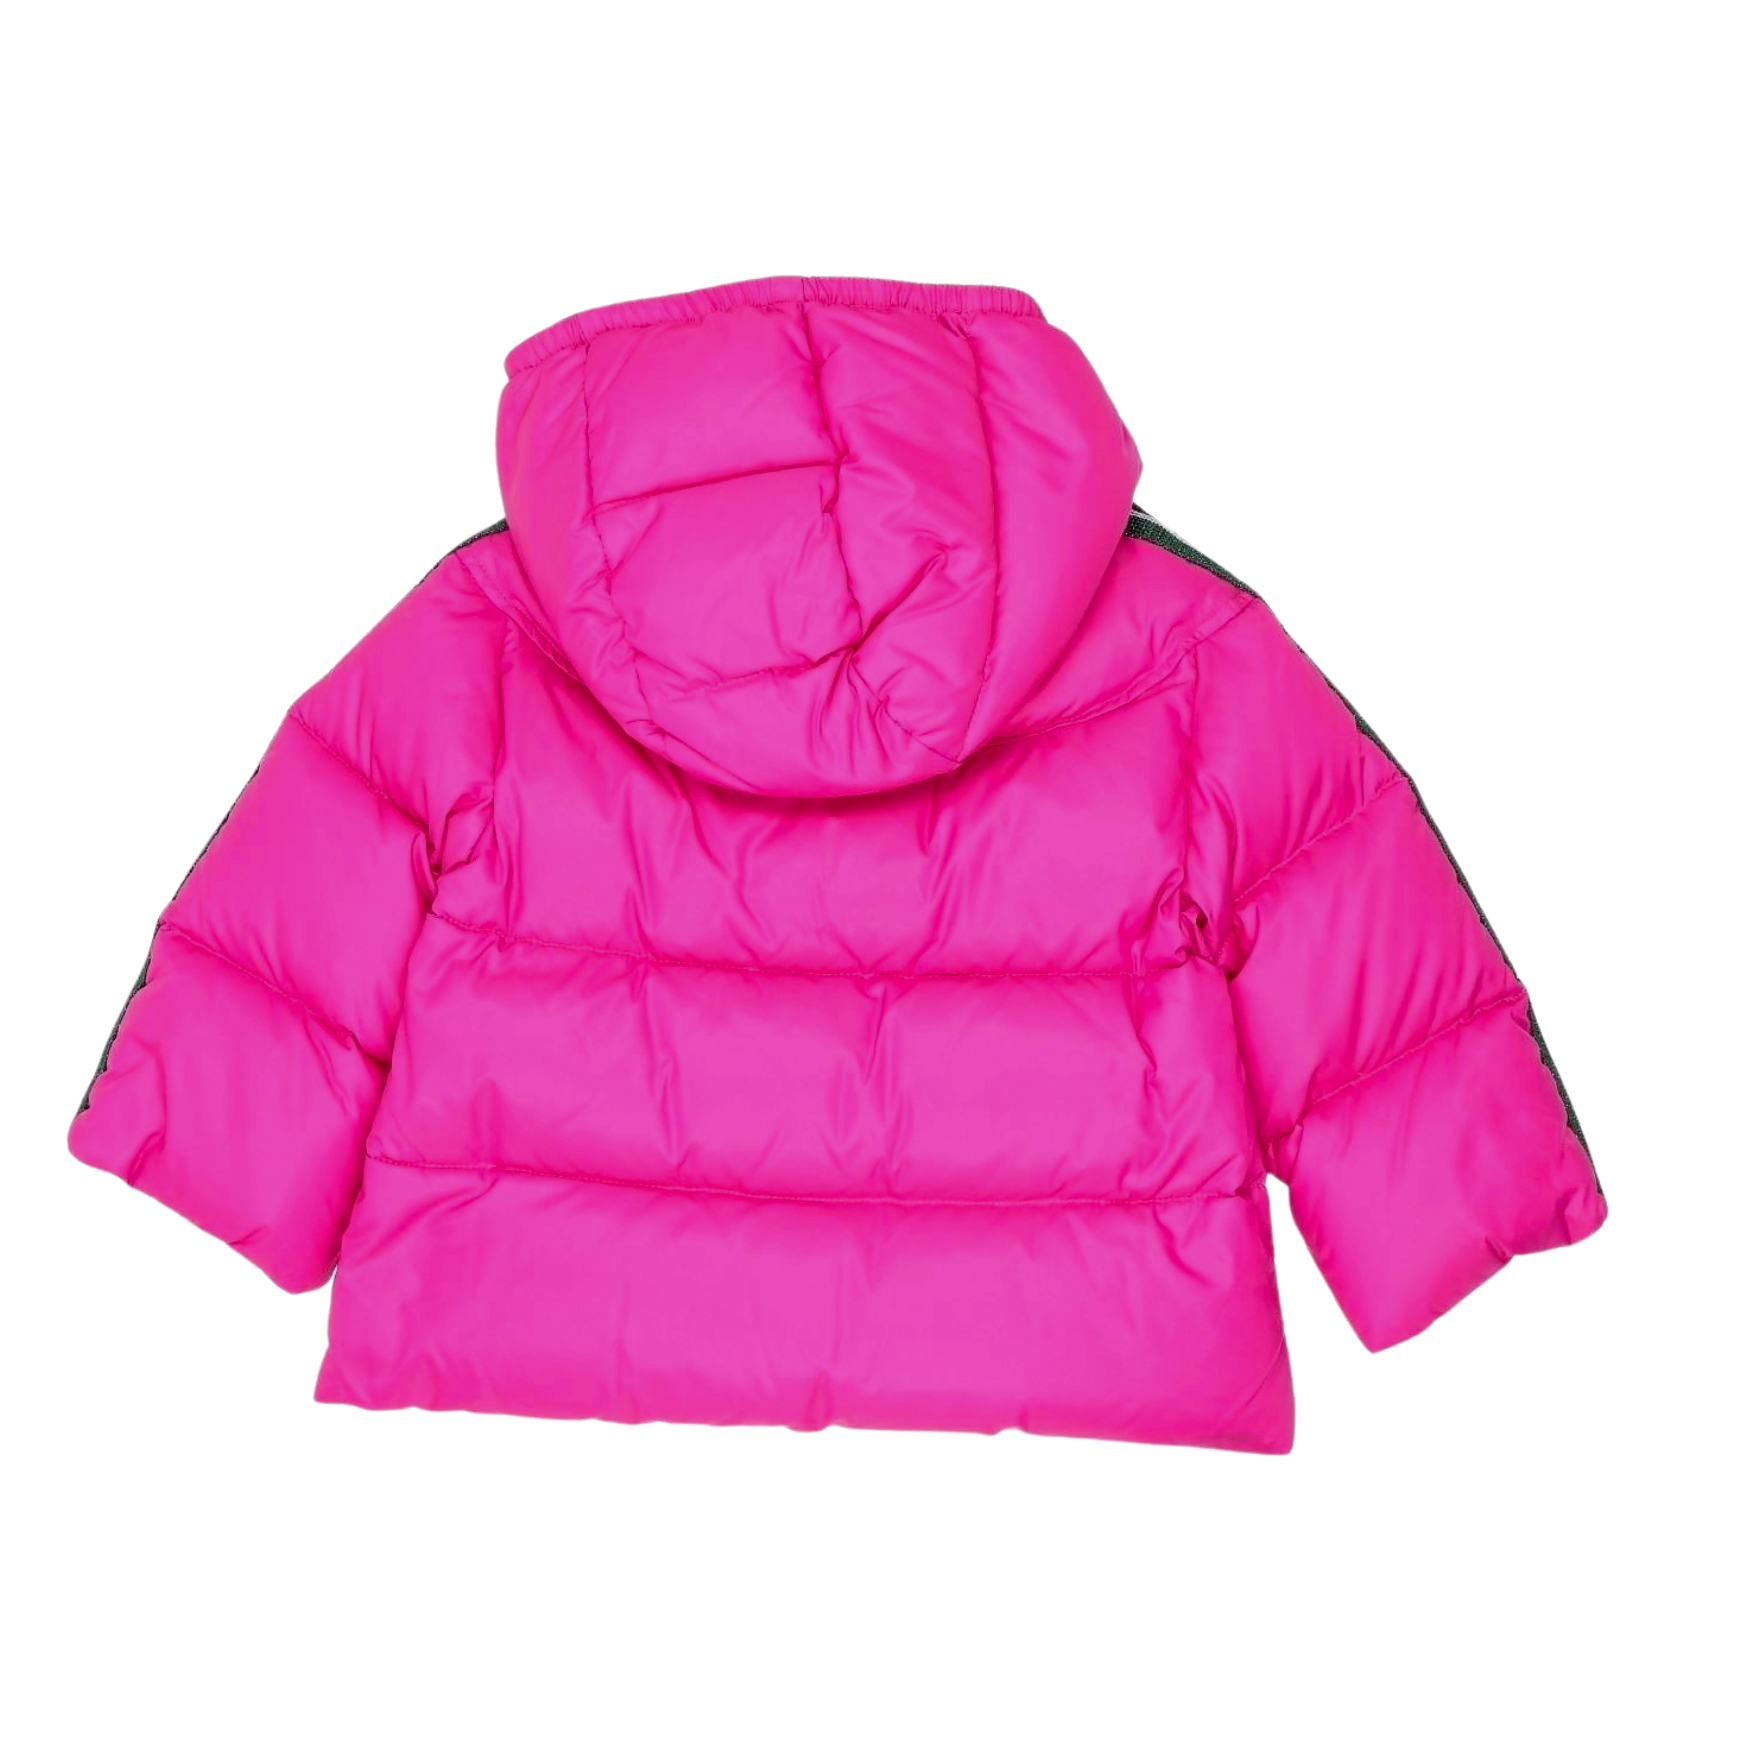 GUCCI - Fushia pink puffer jacket with sequined logo on the sleeves - 9/12 months